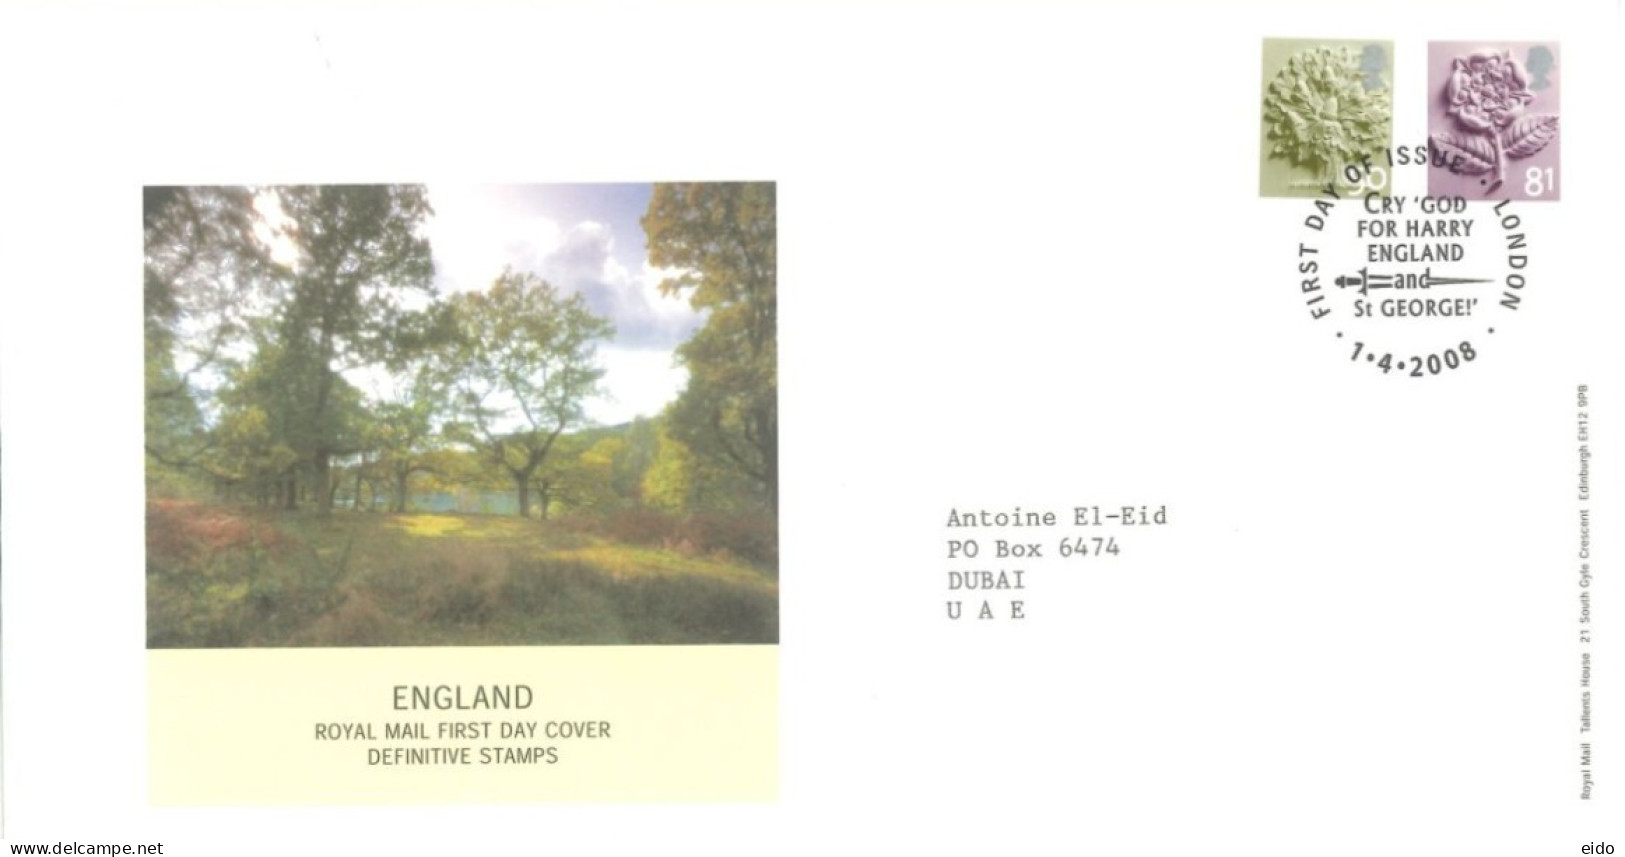 GREAT BRITAIN - 2008, FDC OF ENGLAND ROYAL MAIL DEFINITIVE STAMPS. - Brieven En Documenten